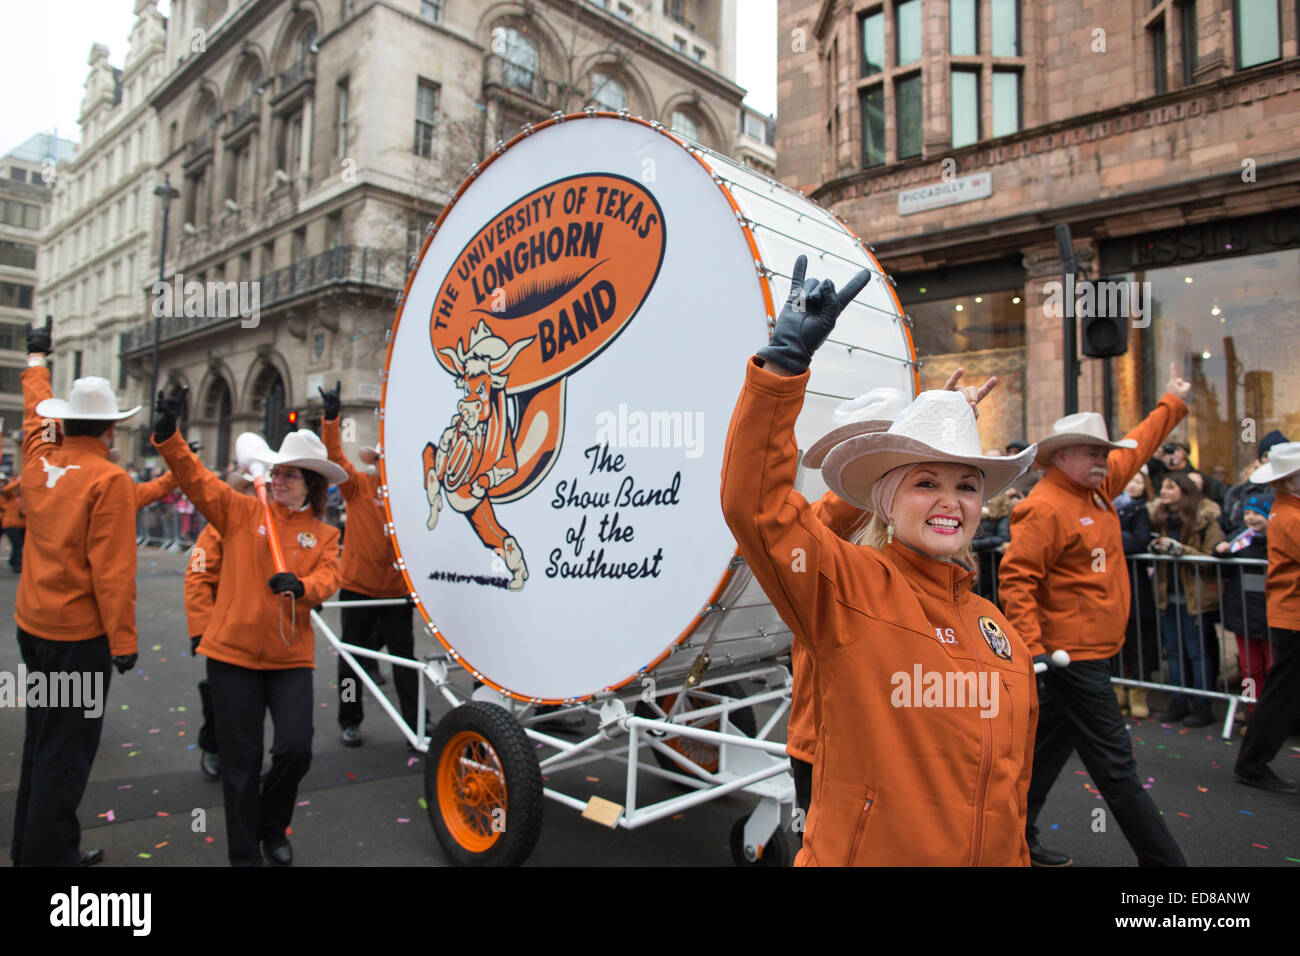 London, UK. 1st January, 2015. London's New Year's Day Parade 2015, London, England, UK Performers from The Longhorn Alumni Band from Texas USA take part in the London's New Year's Parade 2015 with it's transport theme of 'London on the Move' featuring marching bands, dancers and a myriad of vehicles of all shapes abd sizes. Credit:  Jeff Gilbert/Alamy Live News Stock Photo